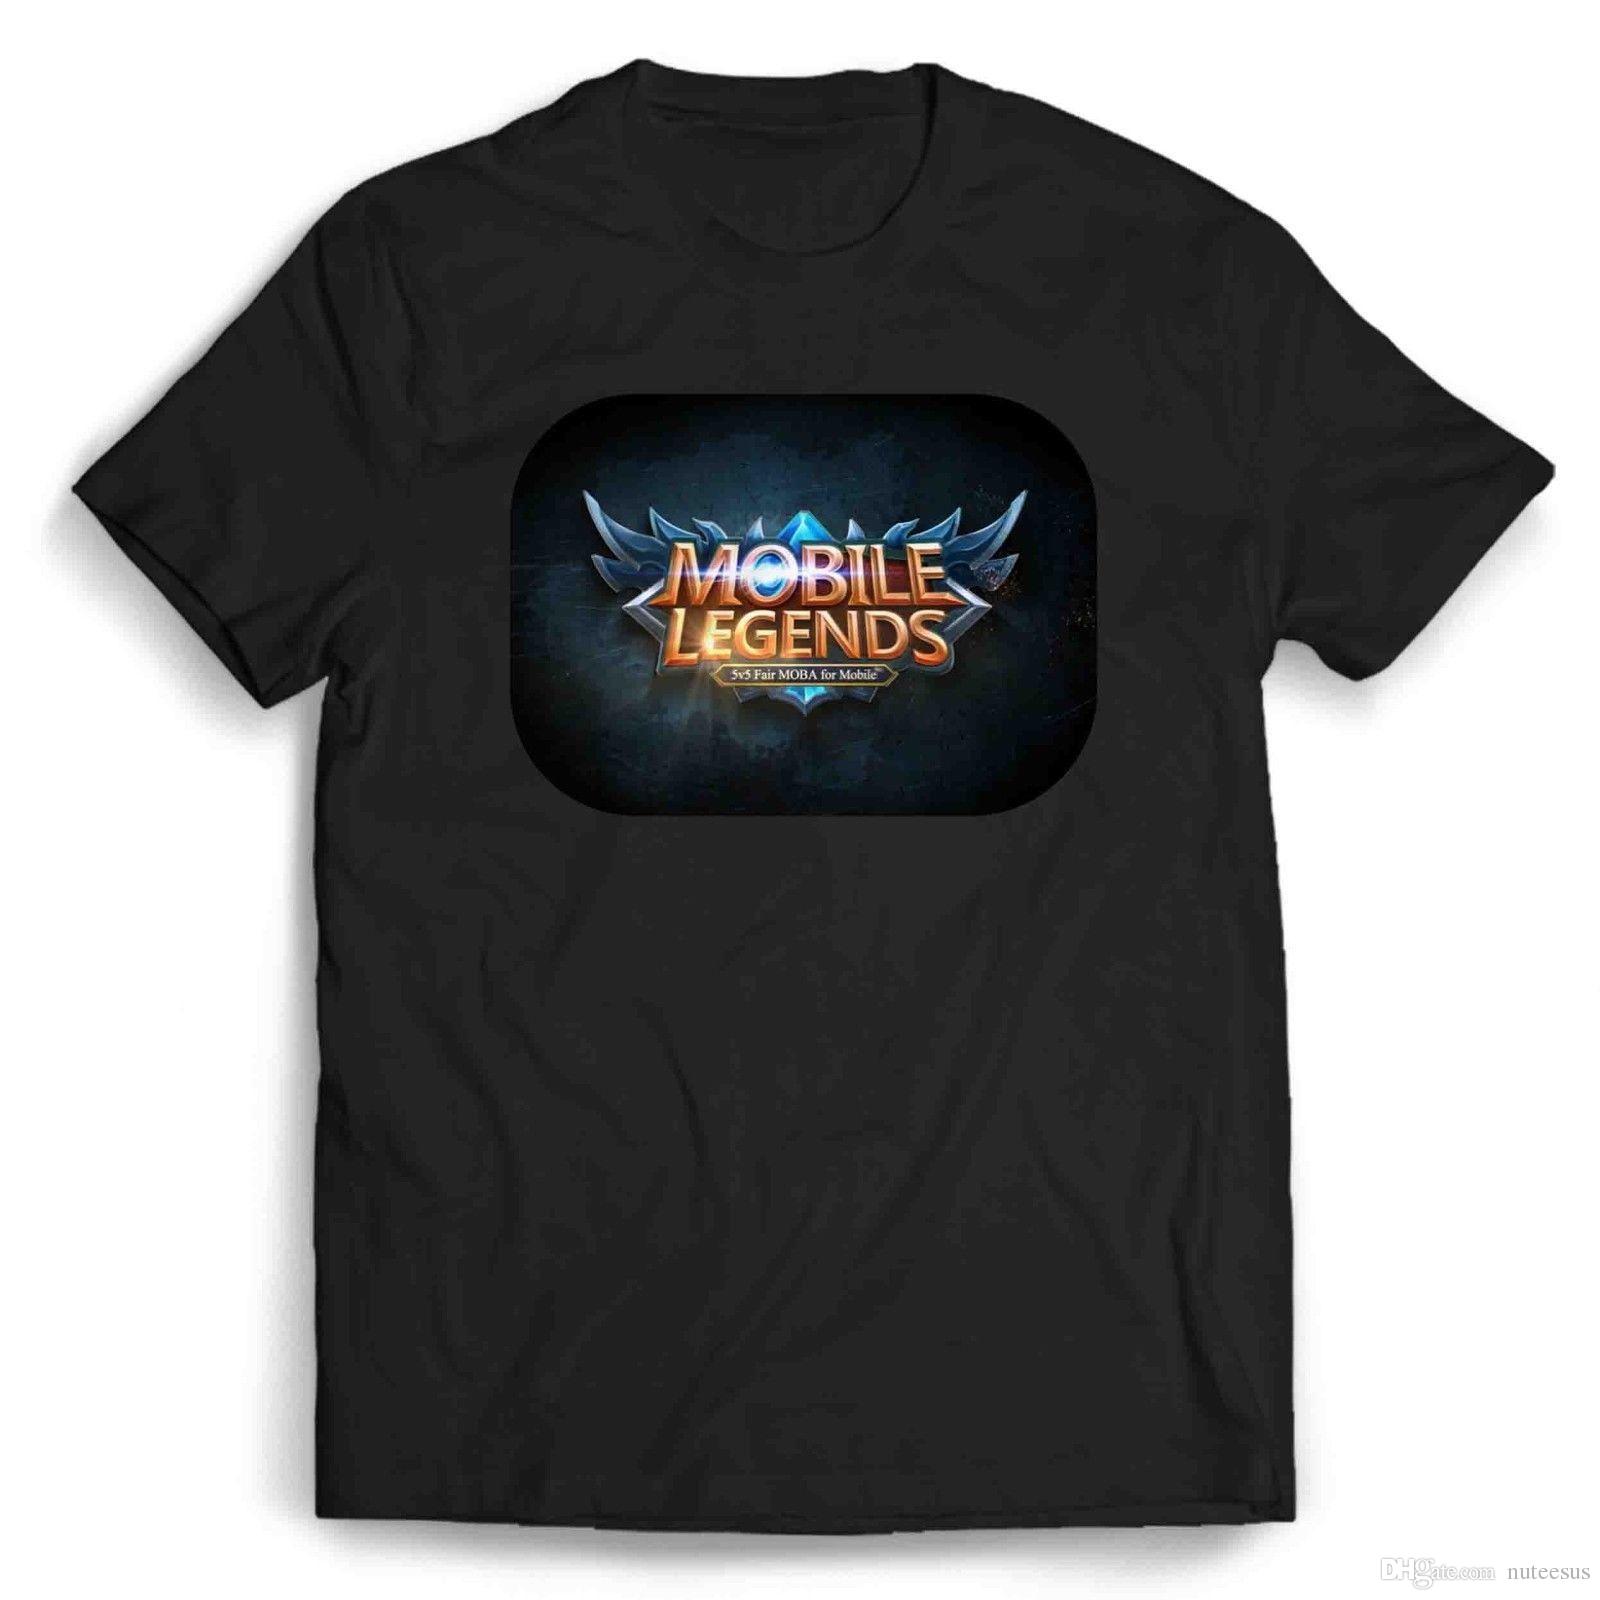 Mobile Legends Logo - Mobile Legends Logo T Shirt T Shirt S Tees Shirts From Nuteesus